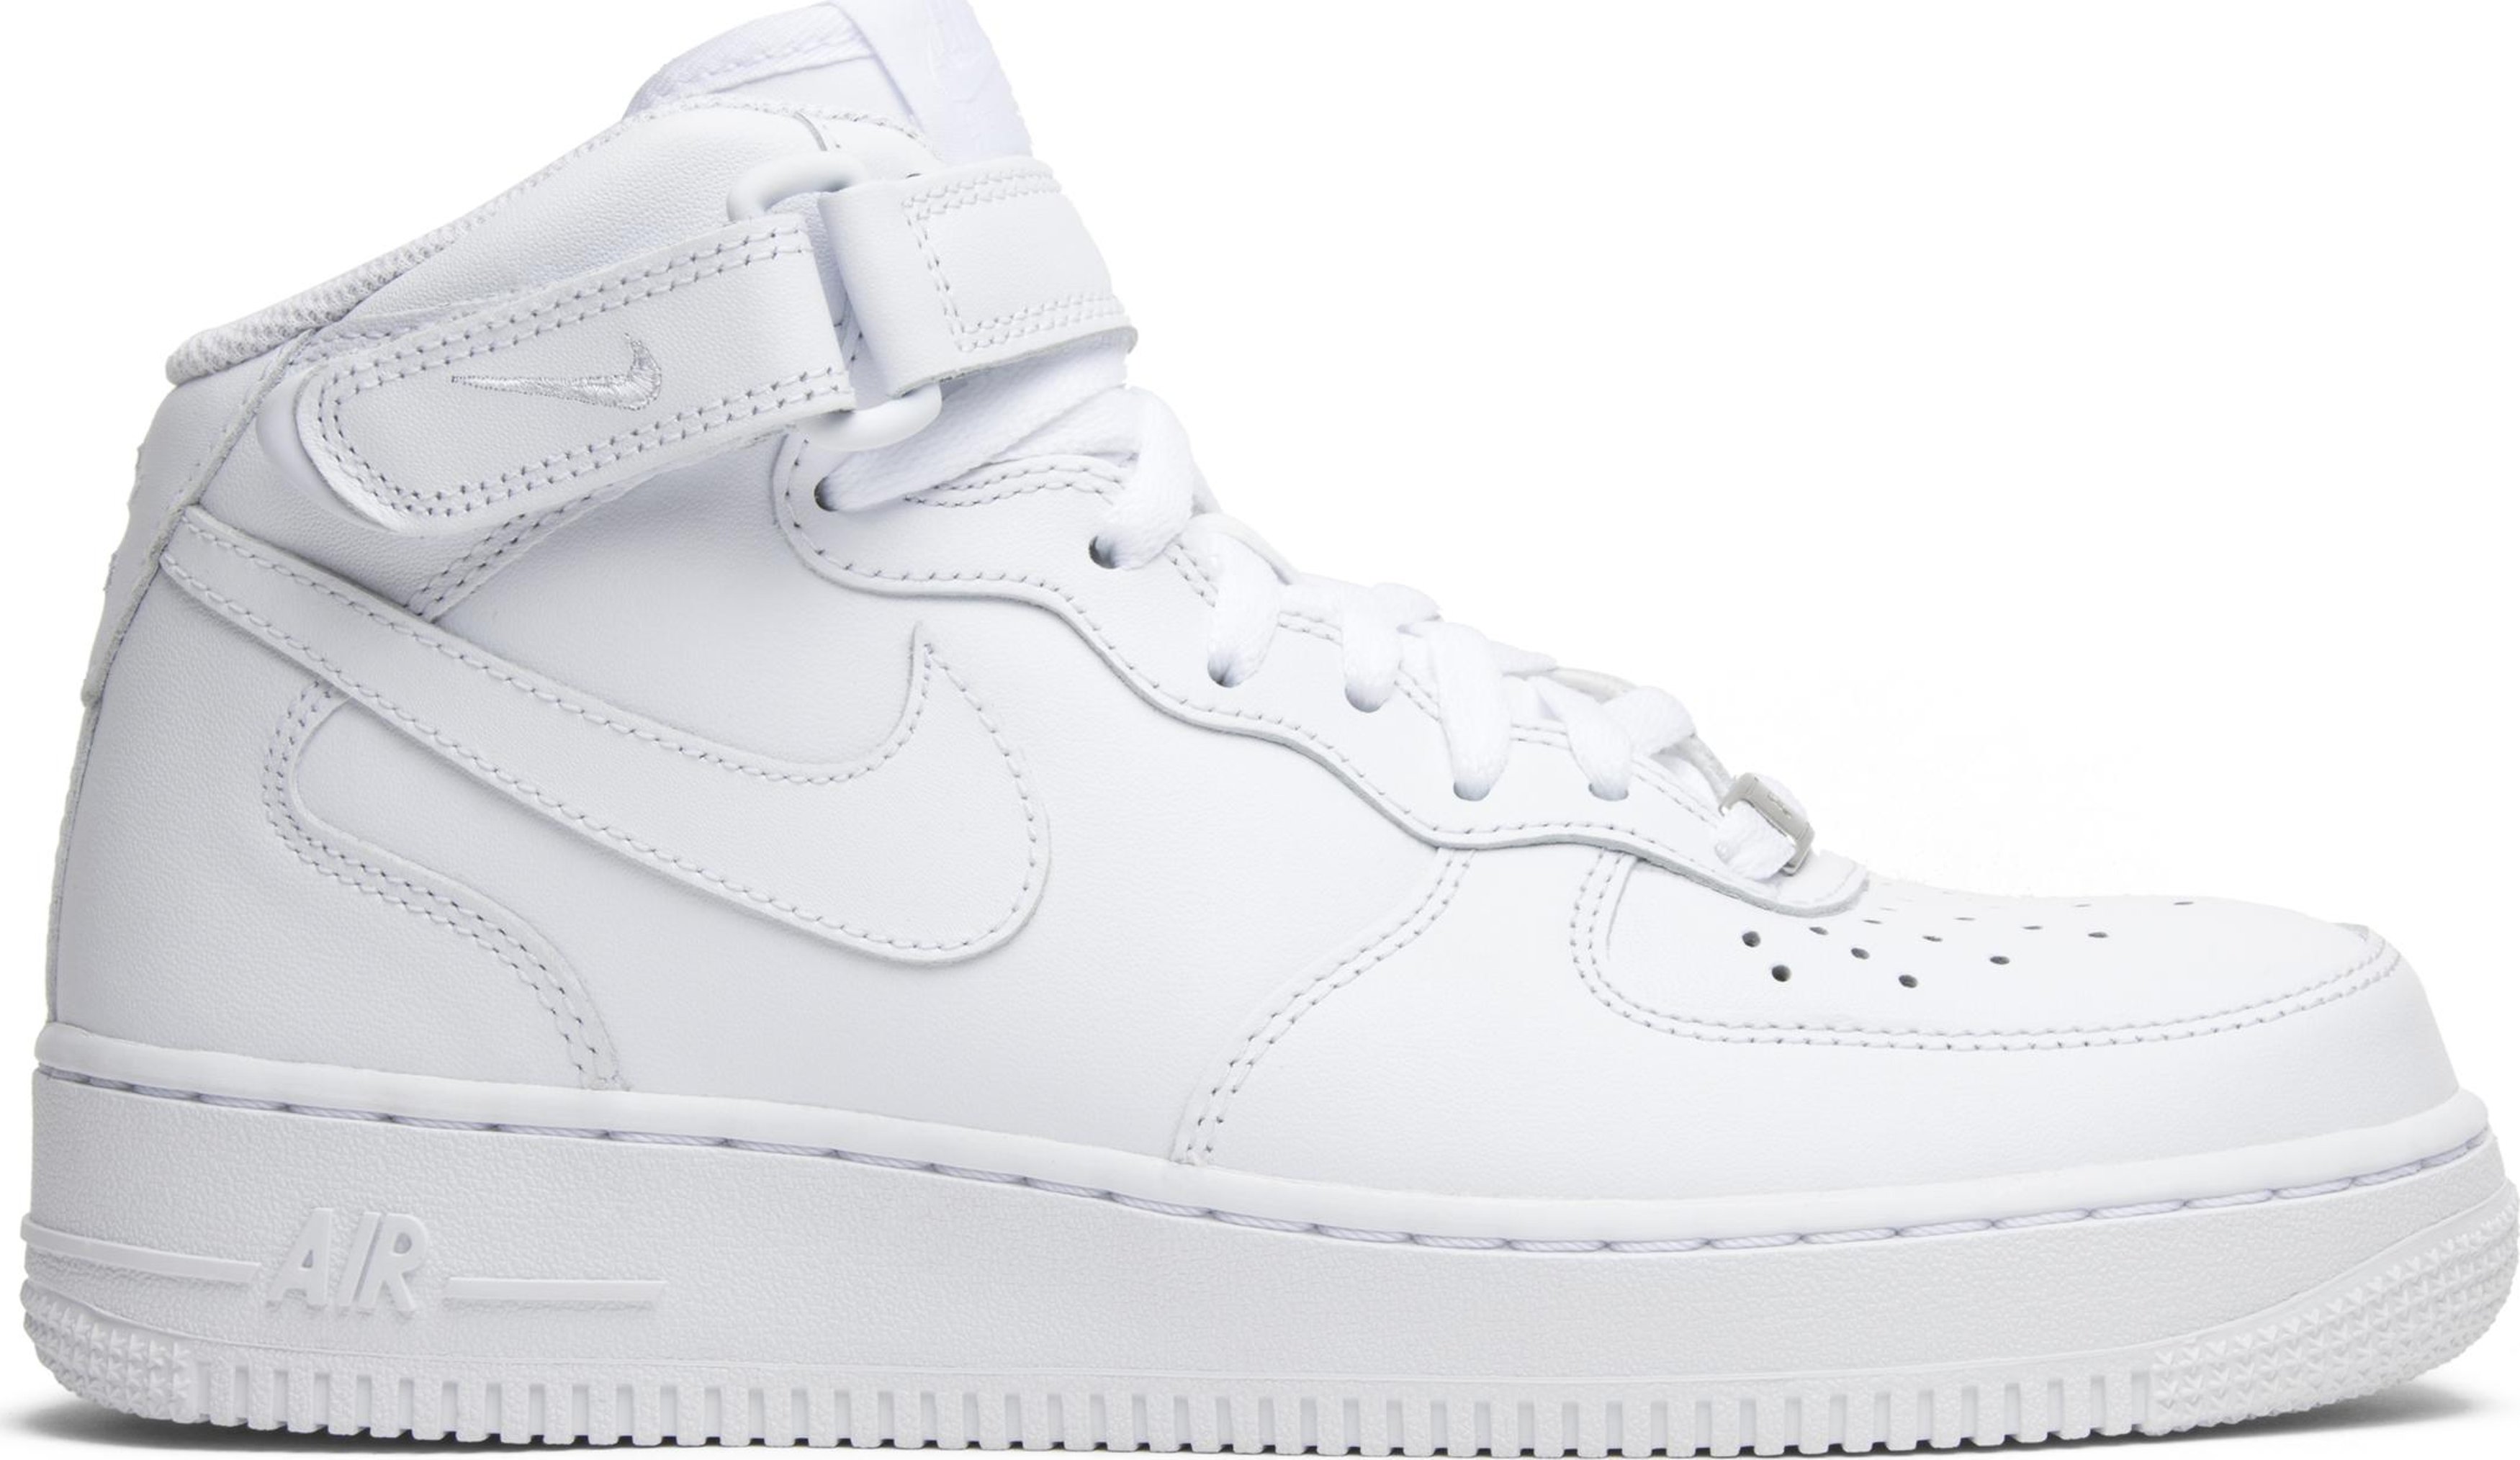 Buy Wmns Air Force 1 Mid 07 Leather 'Triple White' - 366731 100 | GOAT